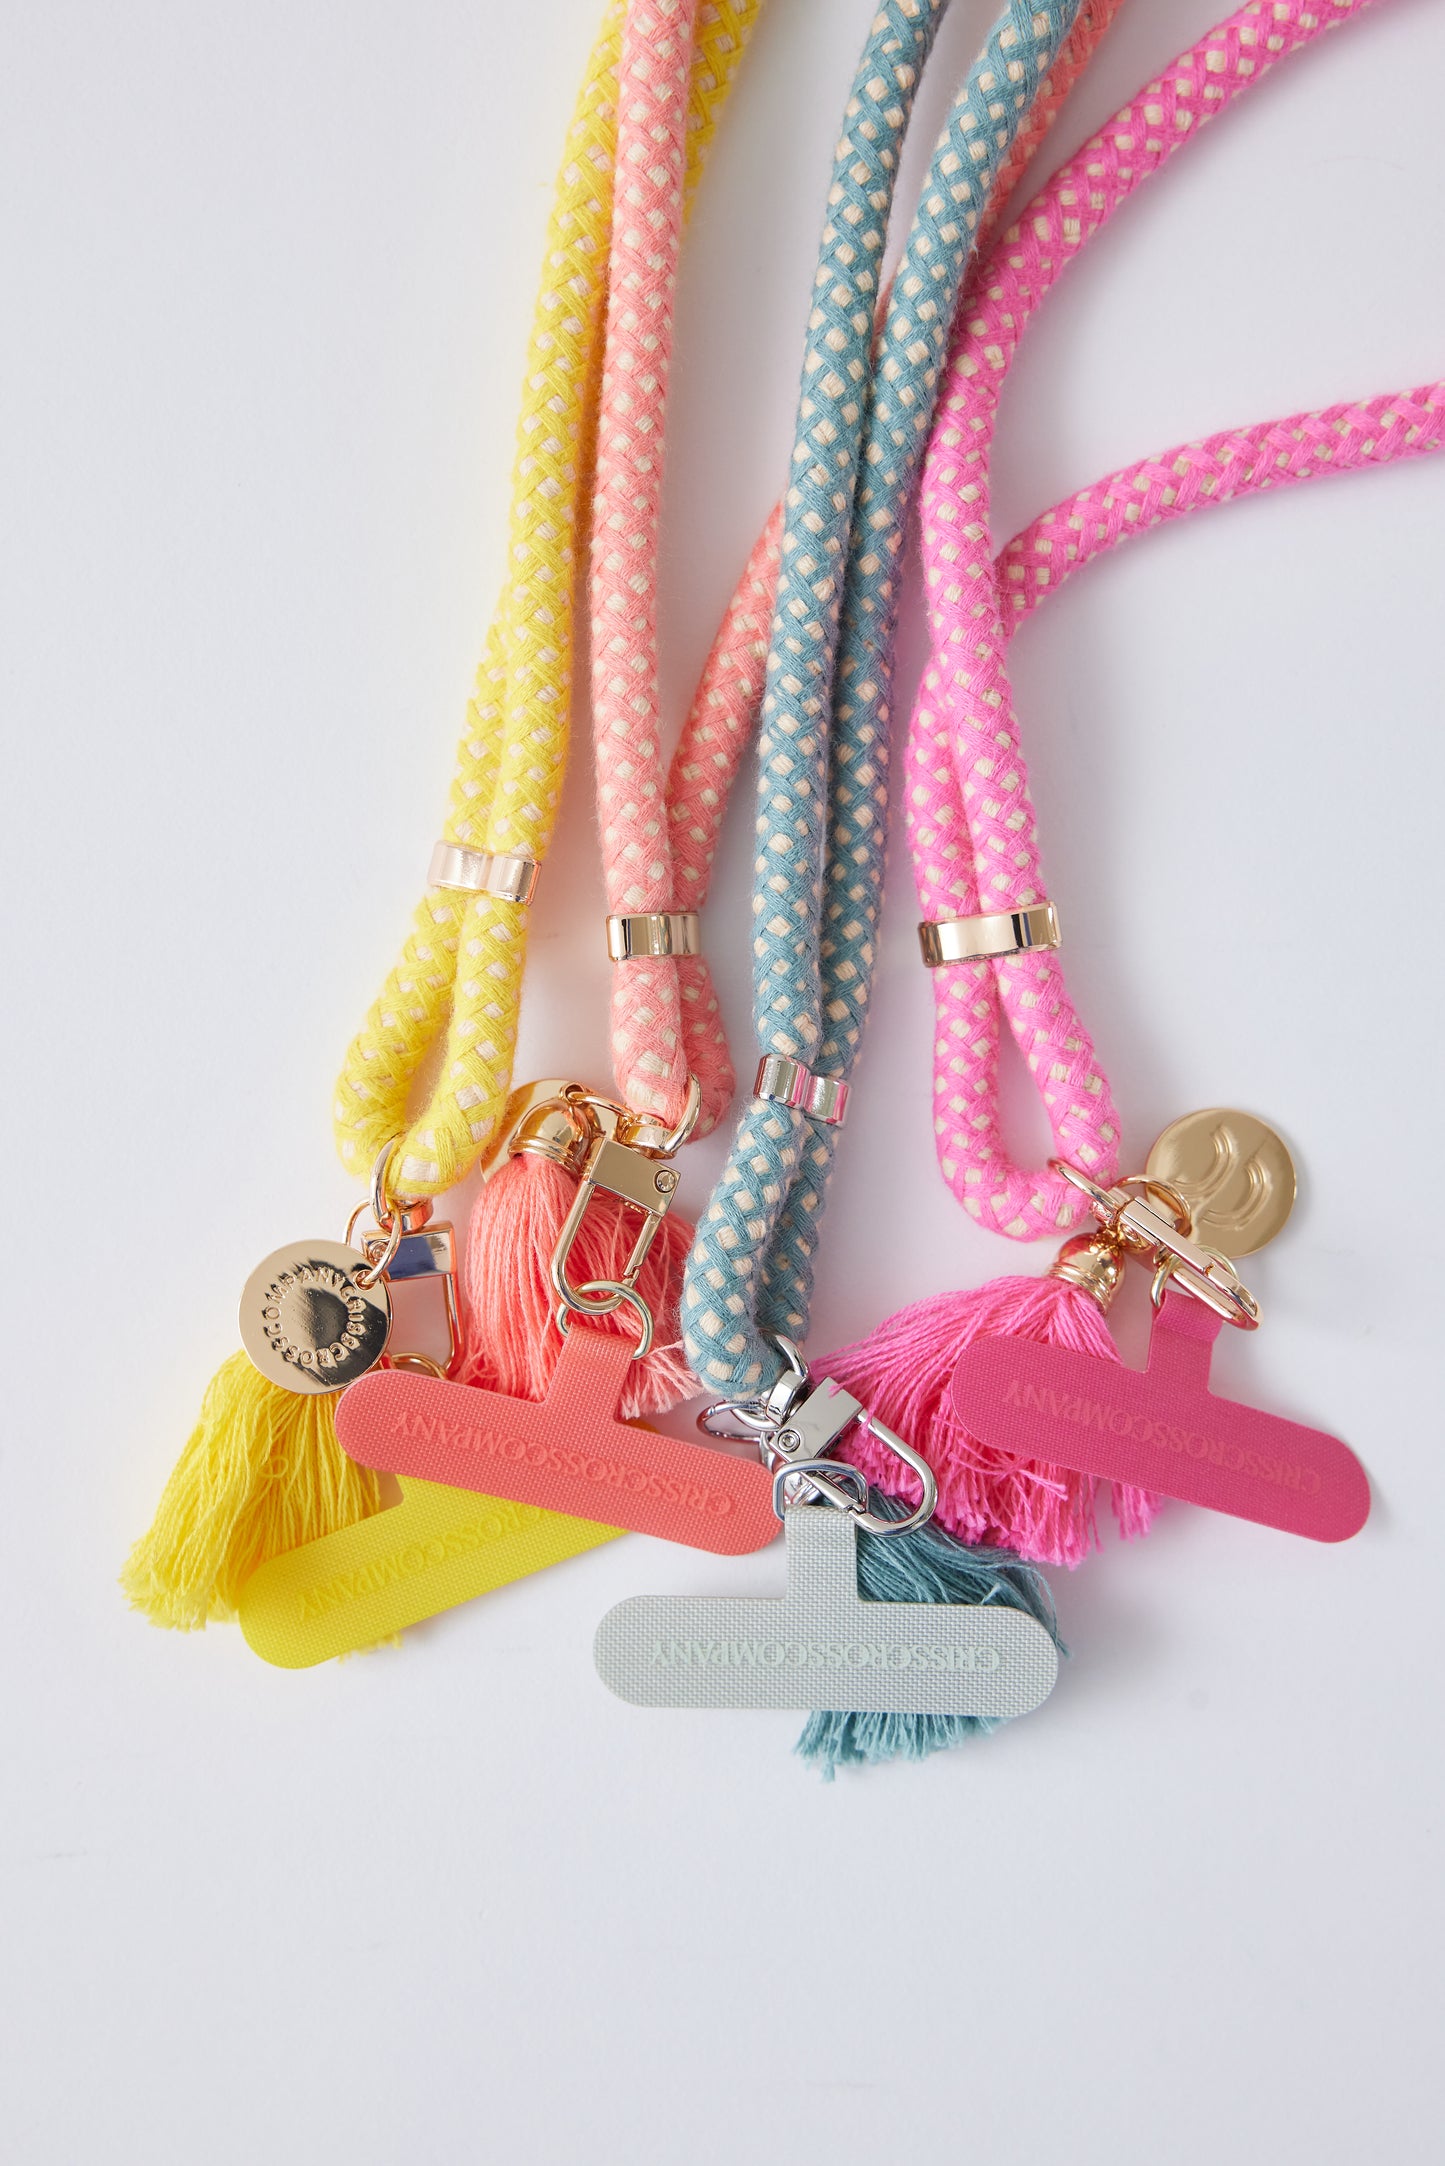 Cotton Phone Straps - one Carabiner with Universal Phone Patch